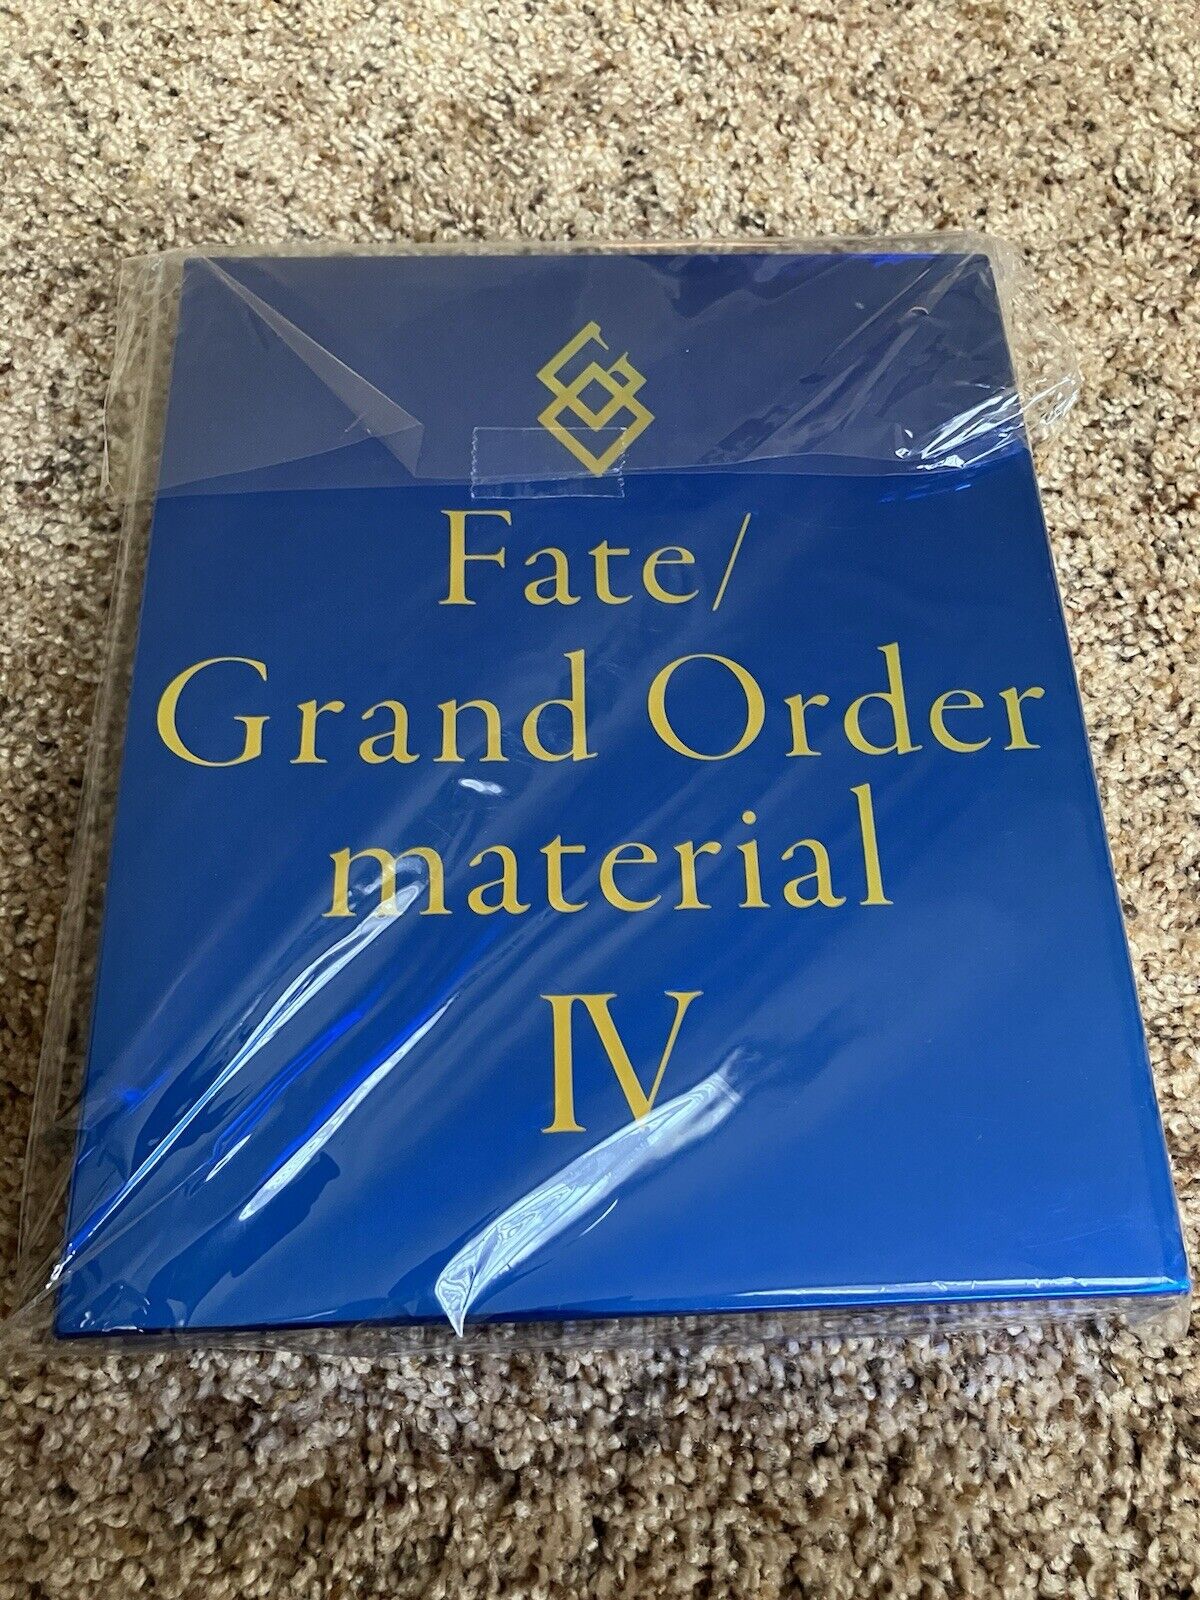 Fate Grand Order Material 4 IV FGO Art Book 450 Pages Character Weapons Skills